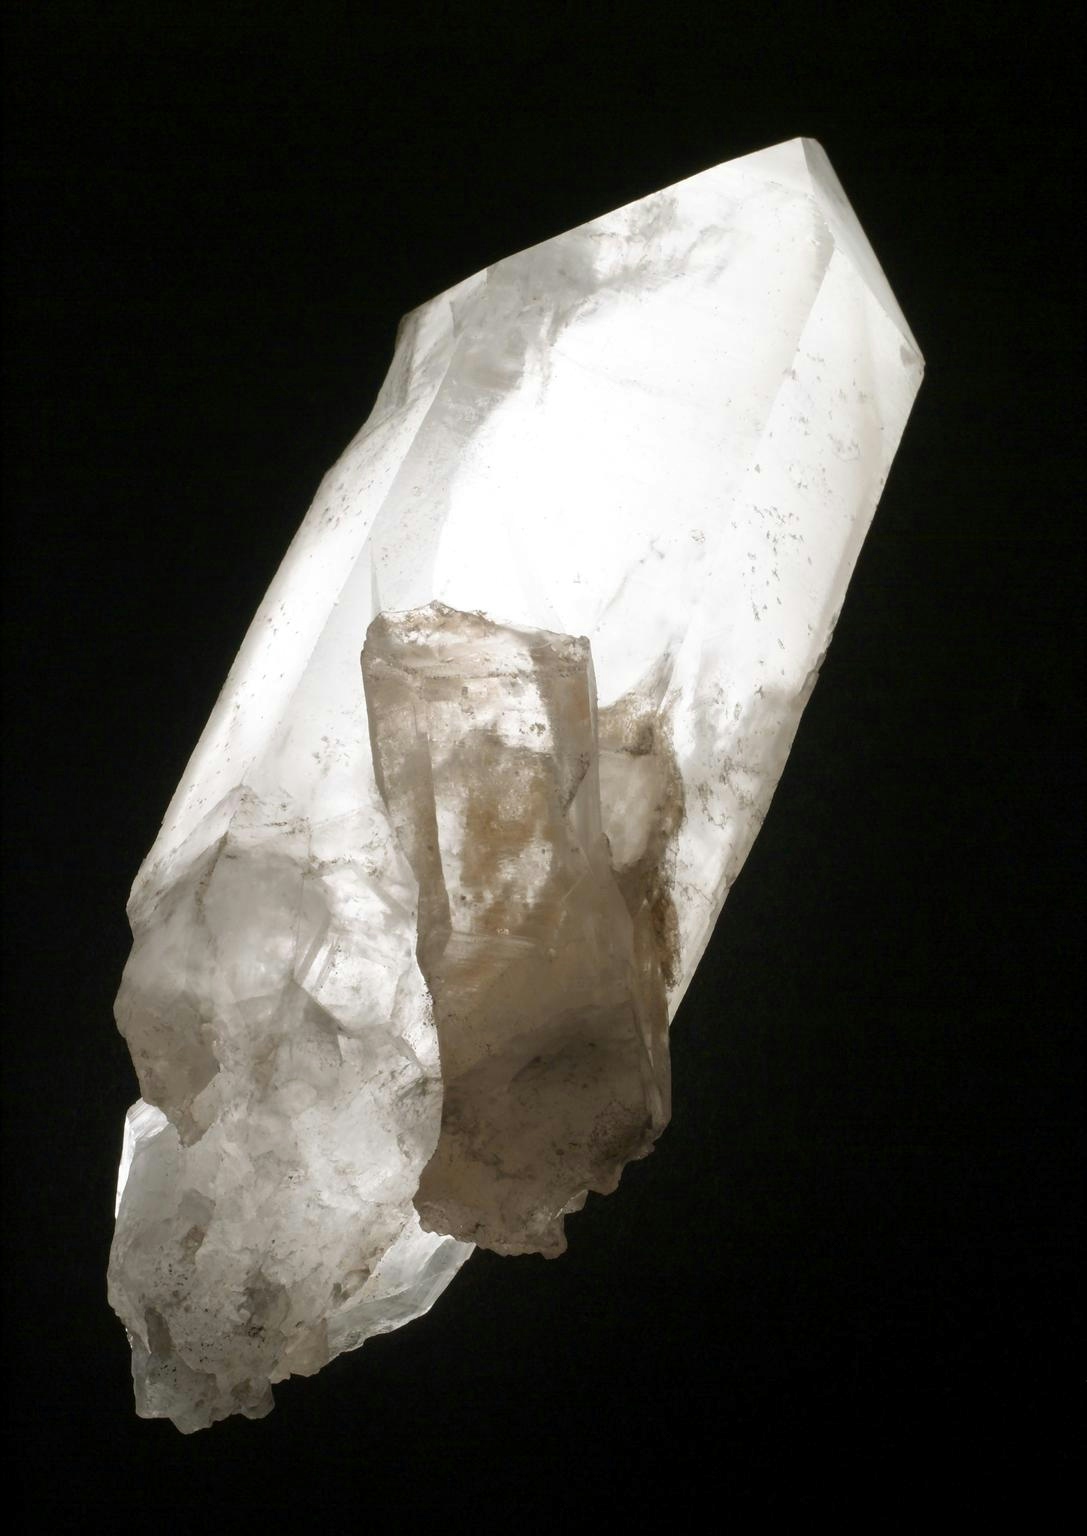 Photograph of a shaped piece of quartz against a black background. The quartz is lit from behind making it glow from within.